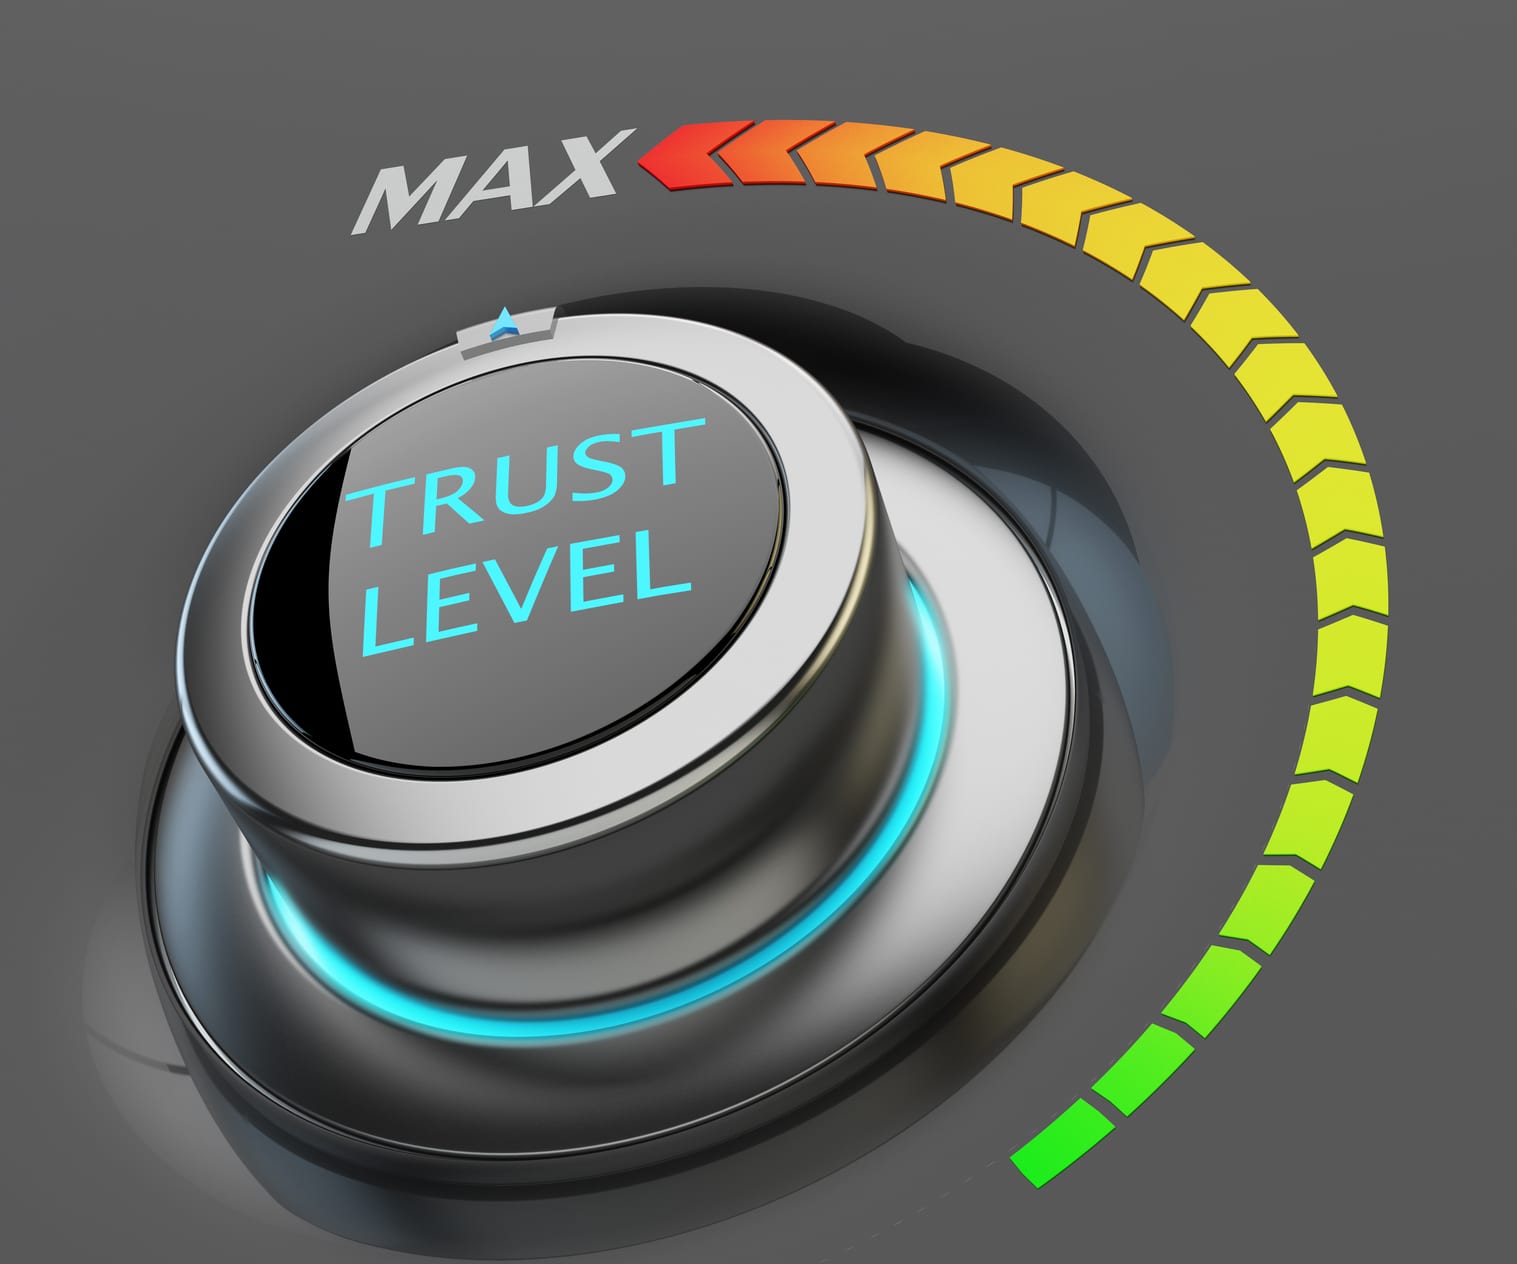 7 Tips for Building Trust and Improving Sales